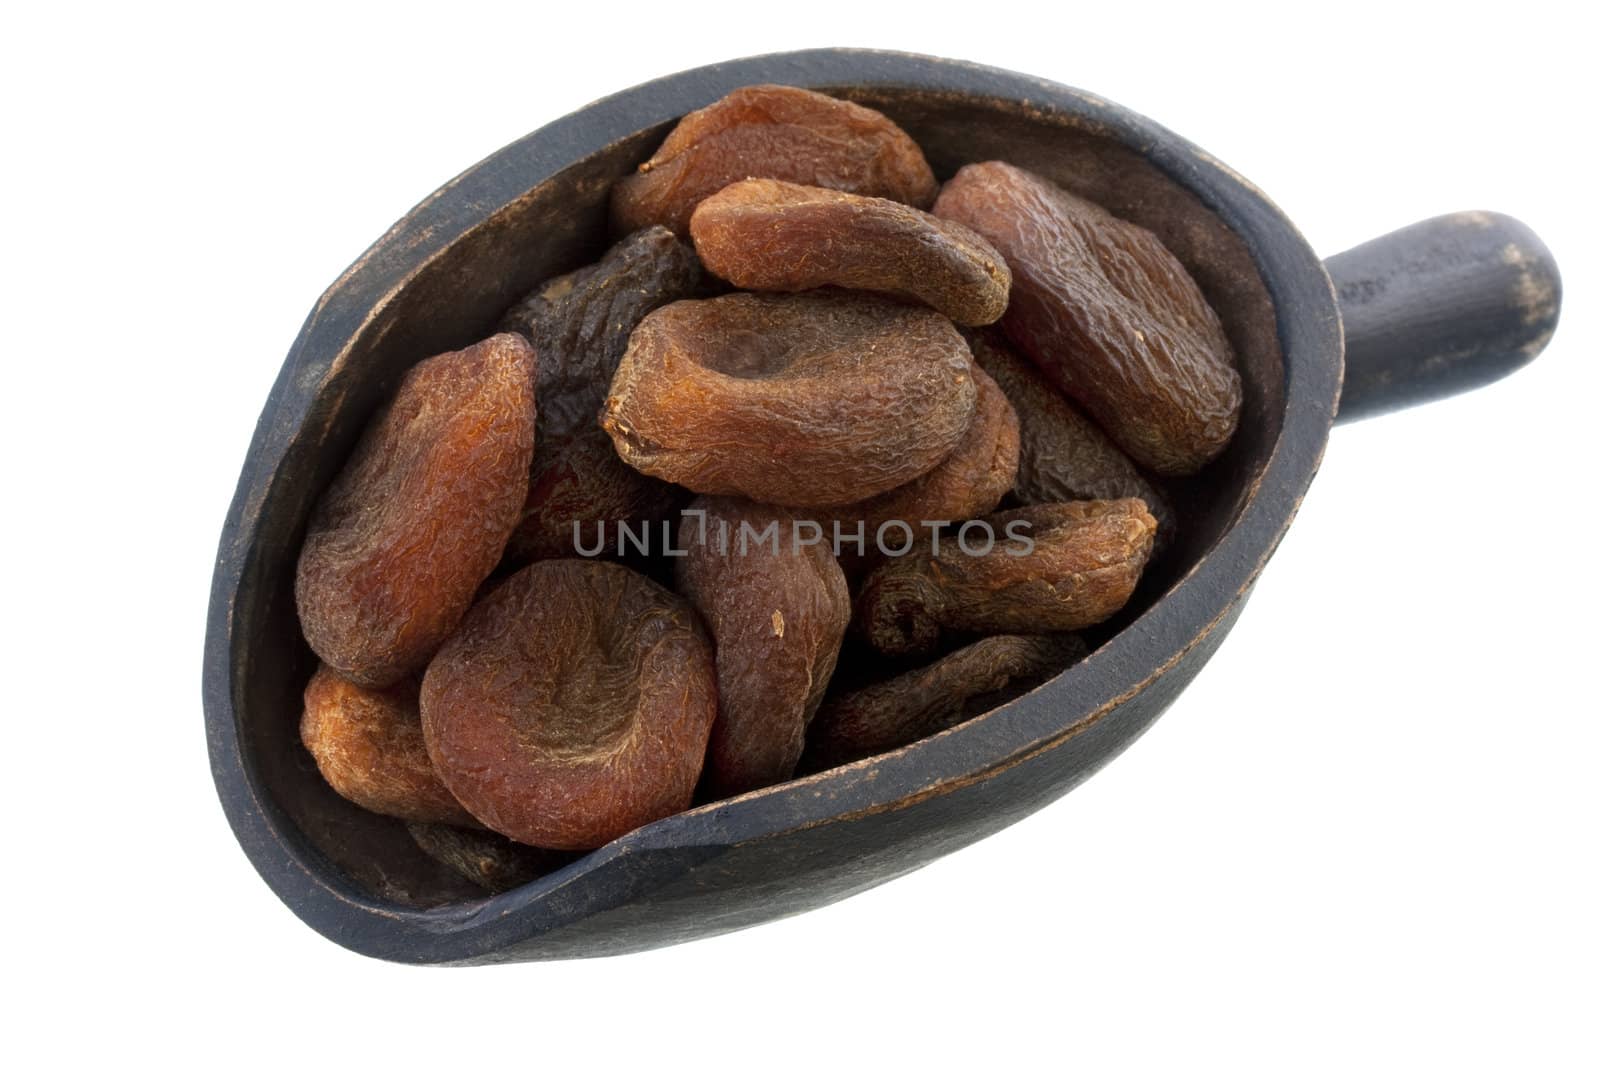 dried Turkish apricots on a rustic, wooden scoop, isolated on white